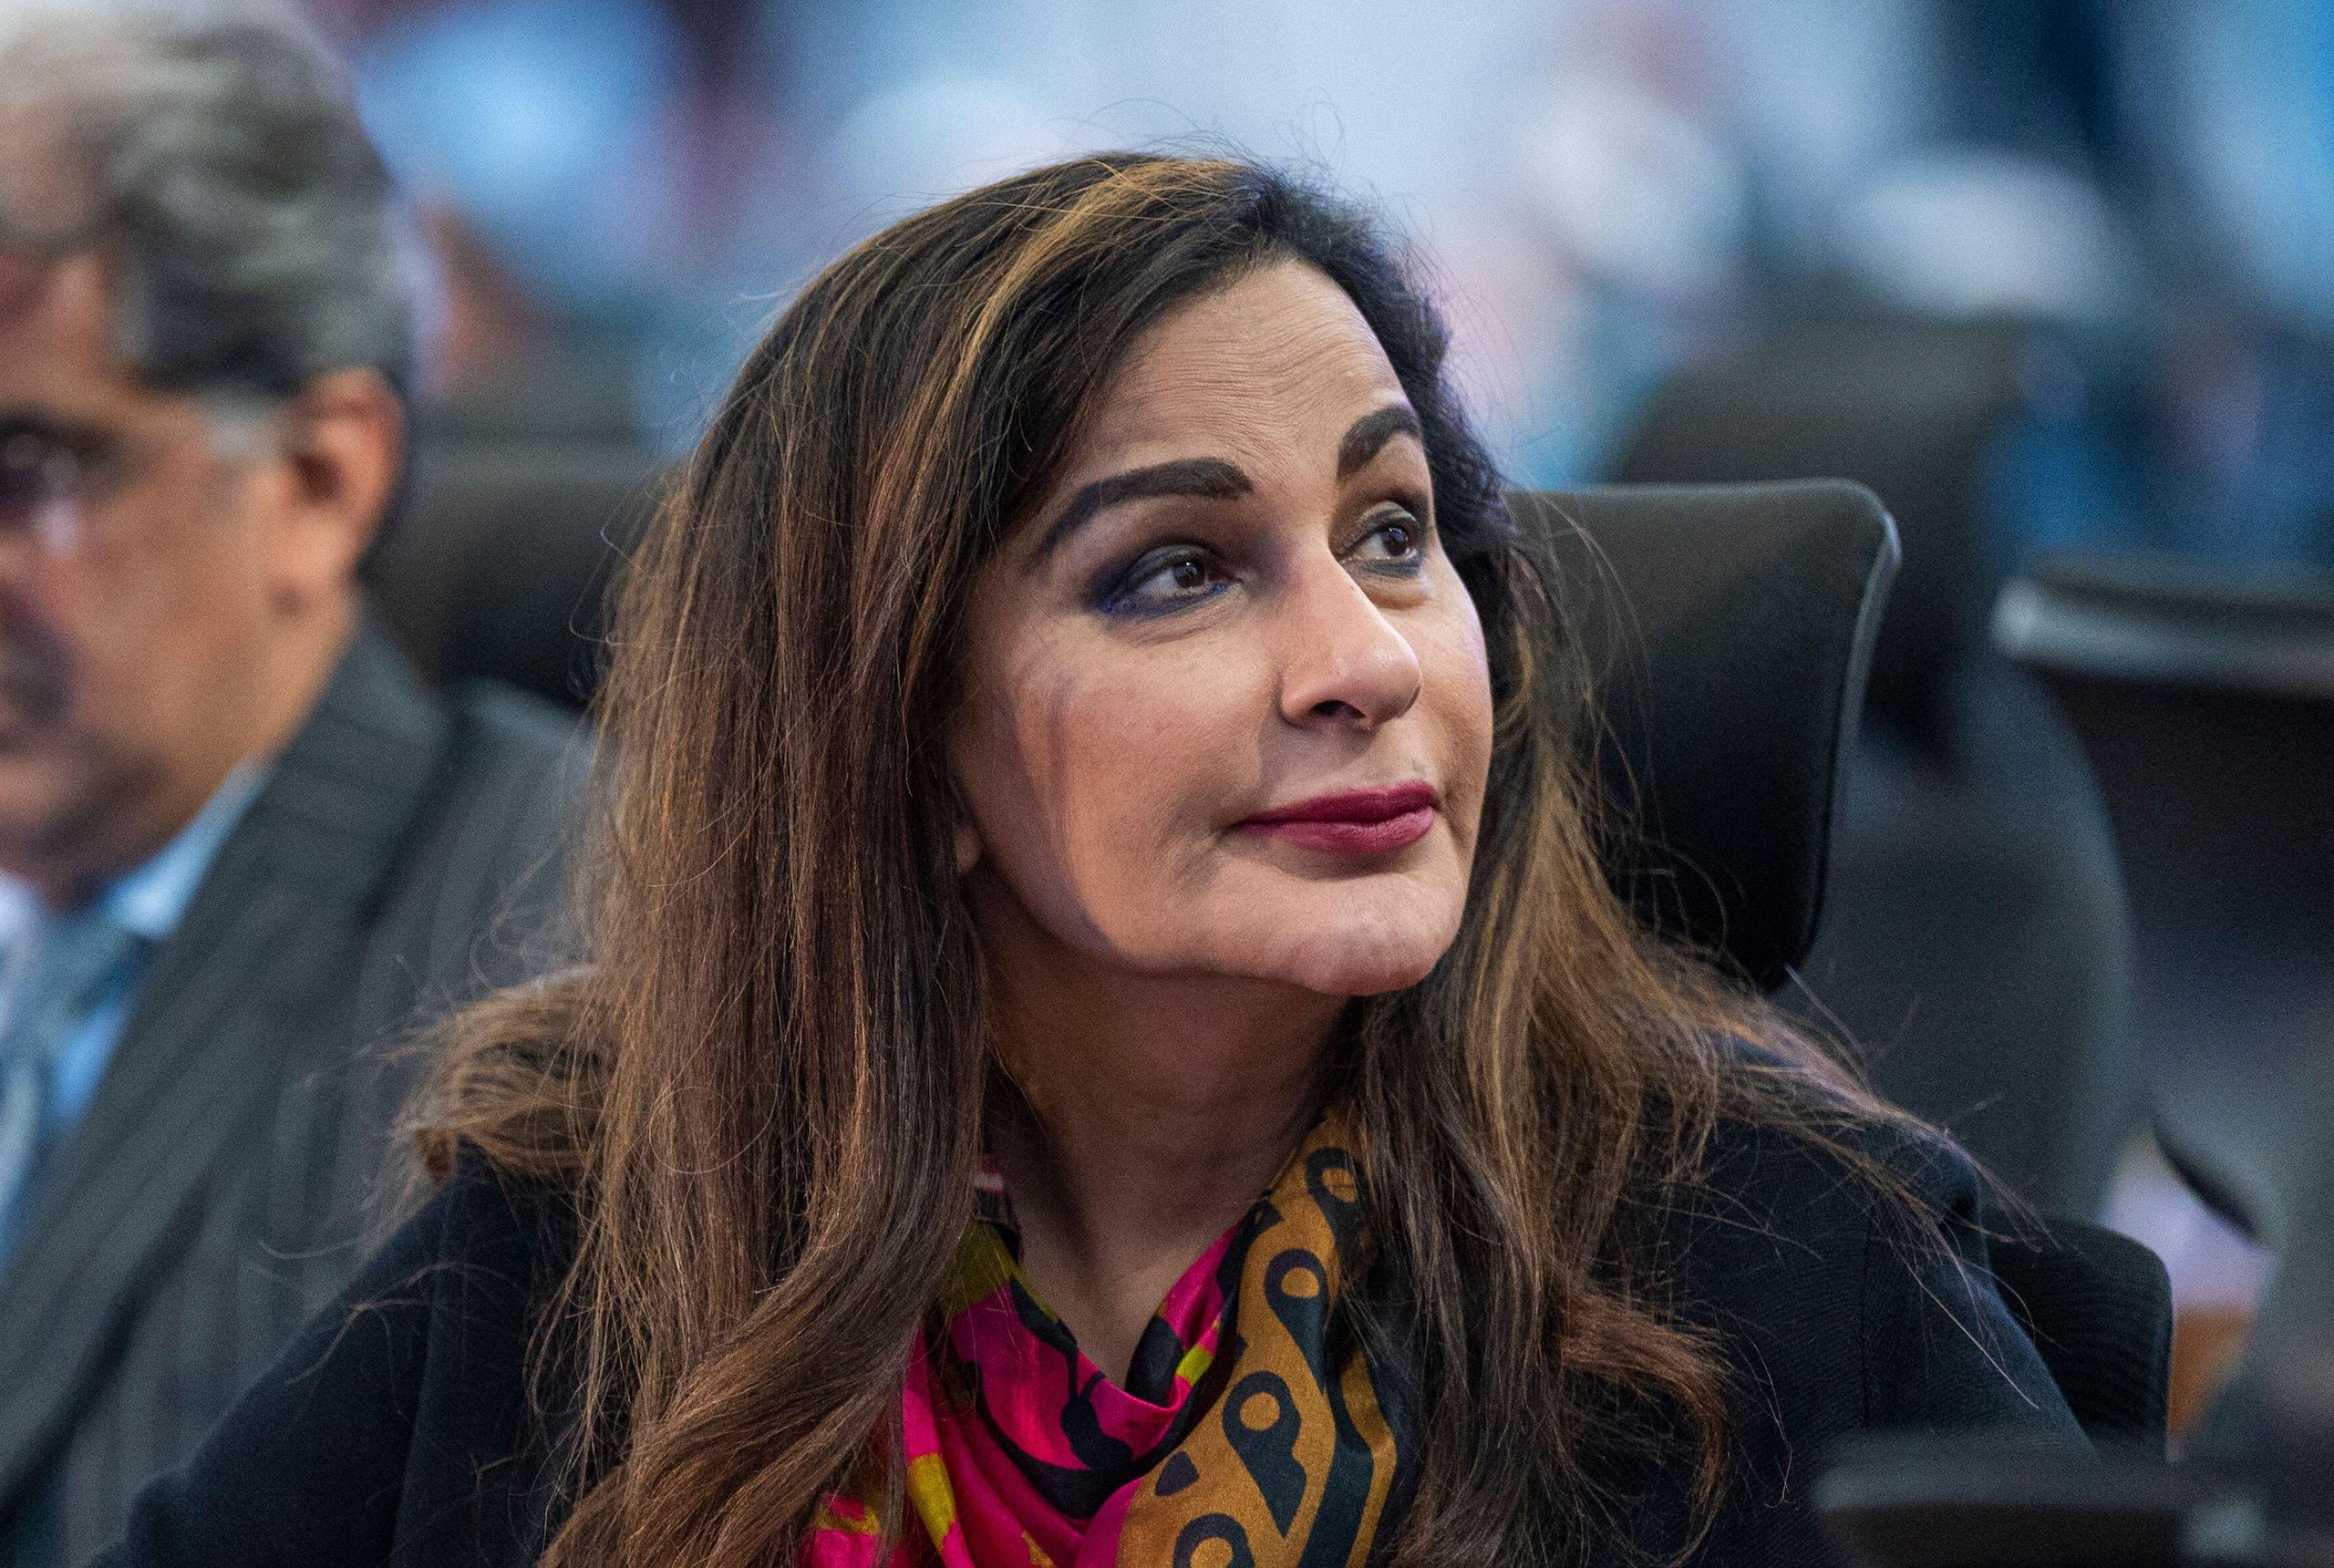 <p>Sherry Rehman, then Pakistan’s federal minister for climate change, at climate summit COP27 in Sharm el-Sheikh, Egypt, November 2022 (Image: Christophe Gateau / Alamy)</p>